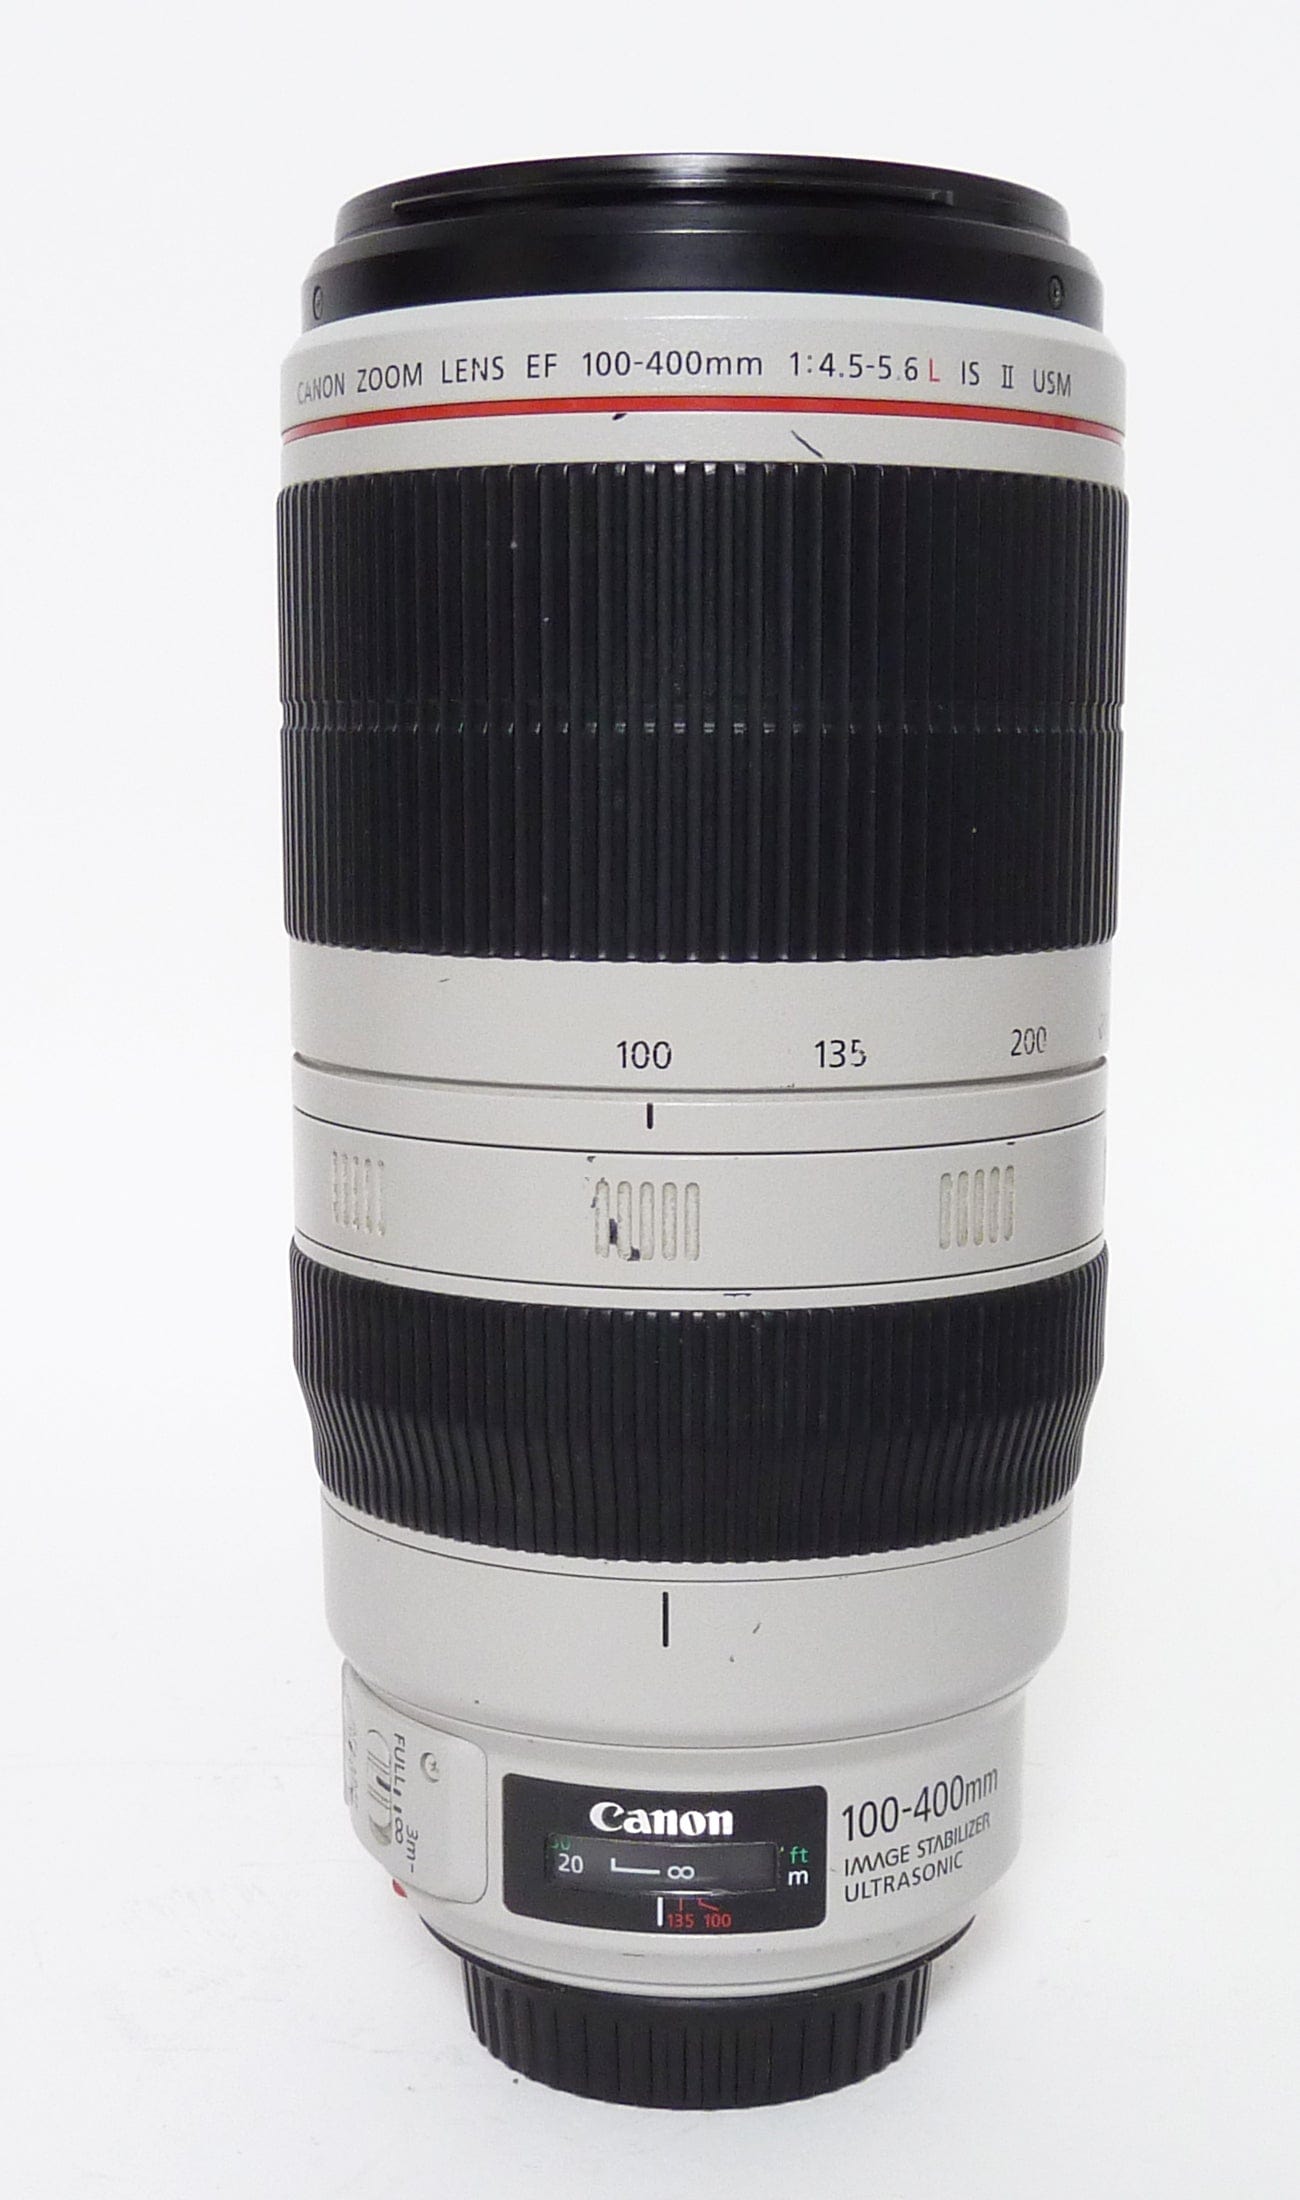 Canon EF 100-400mm f4.5/5.6L IS II Lens - Just cleaned